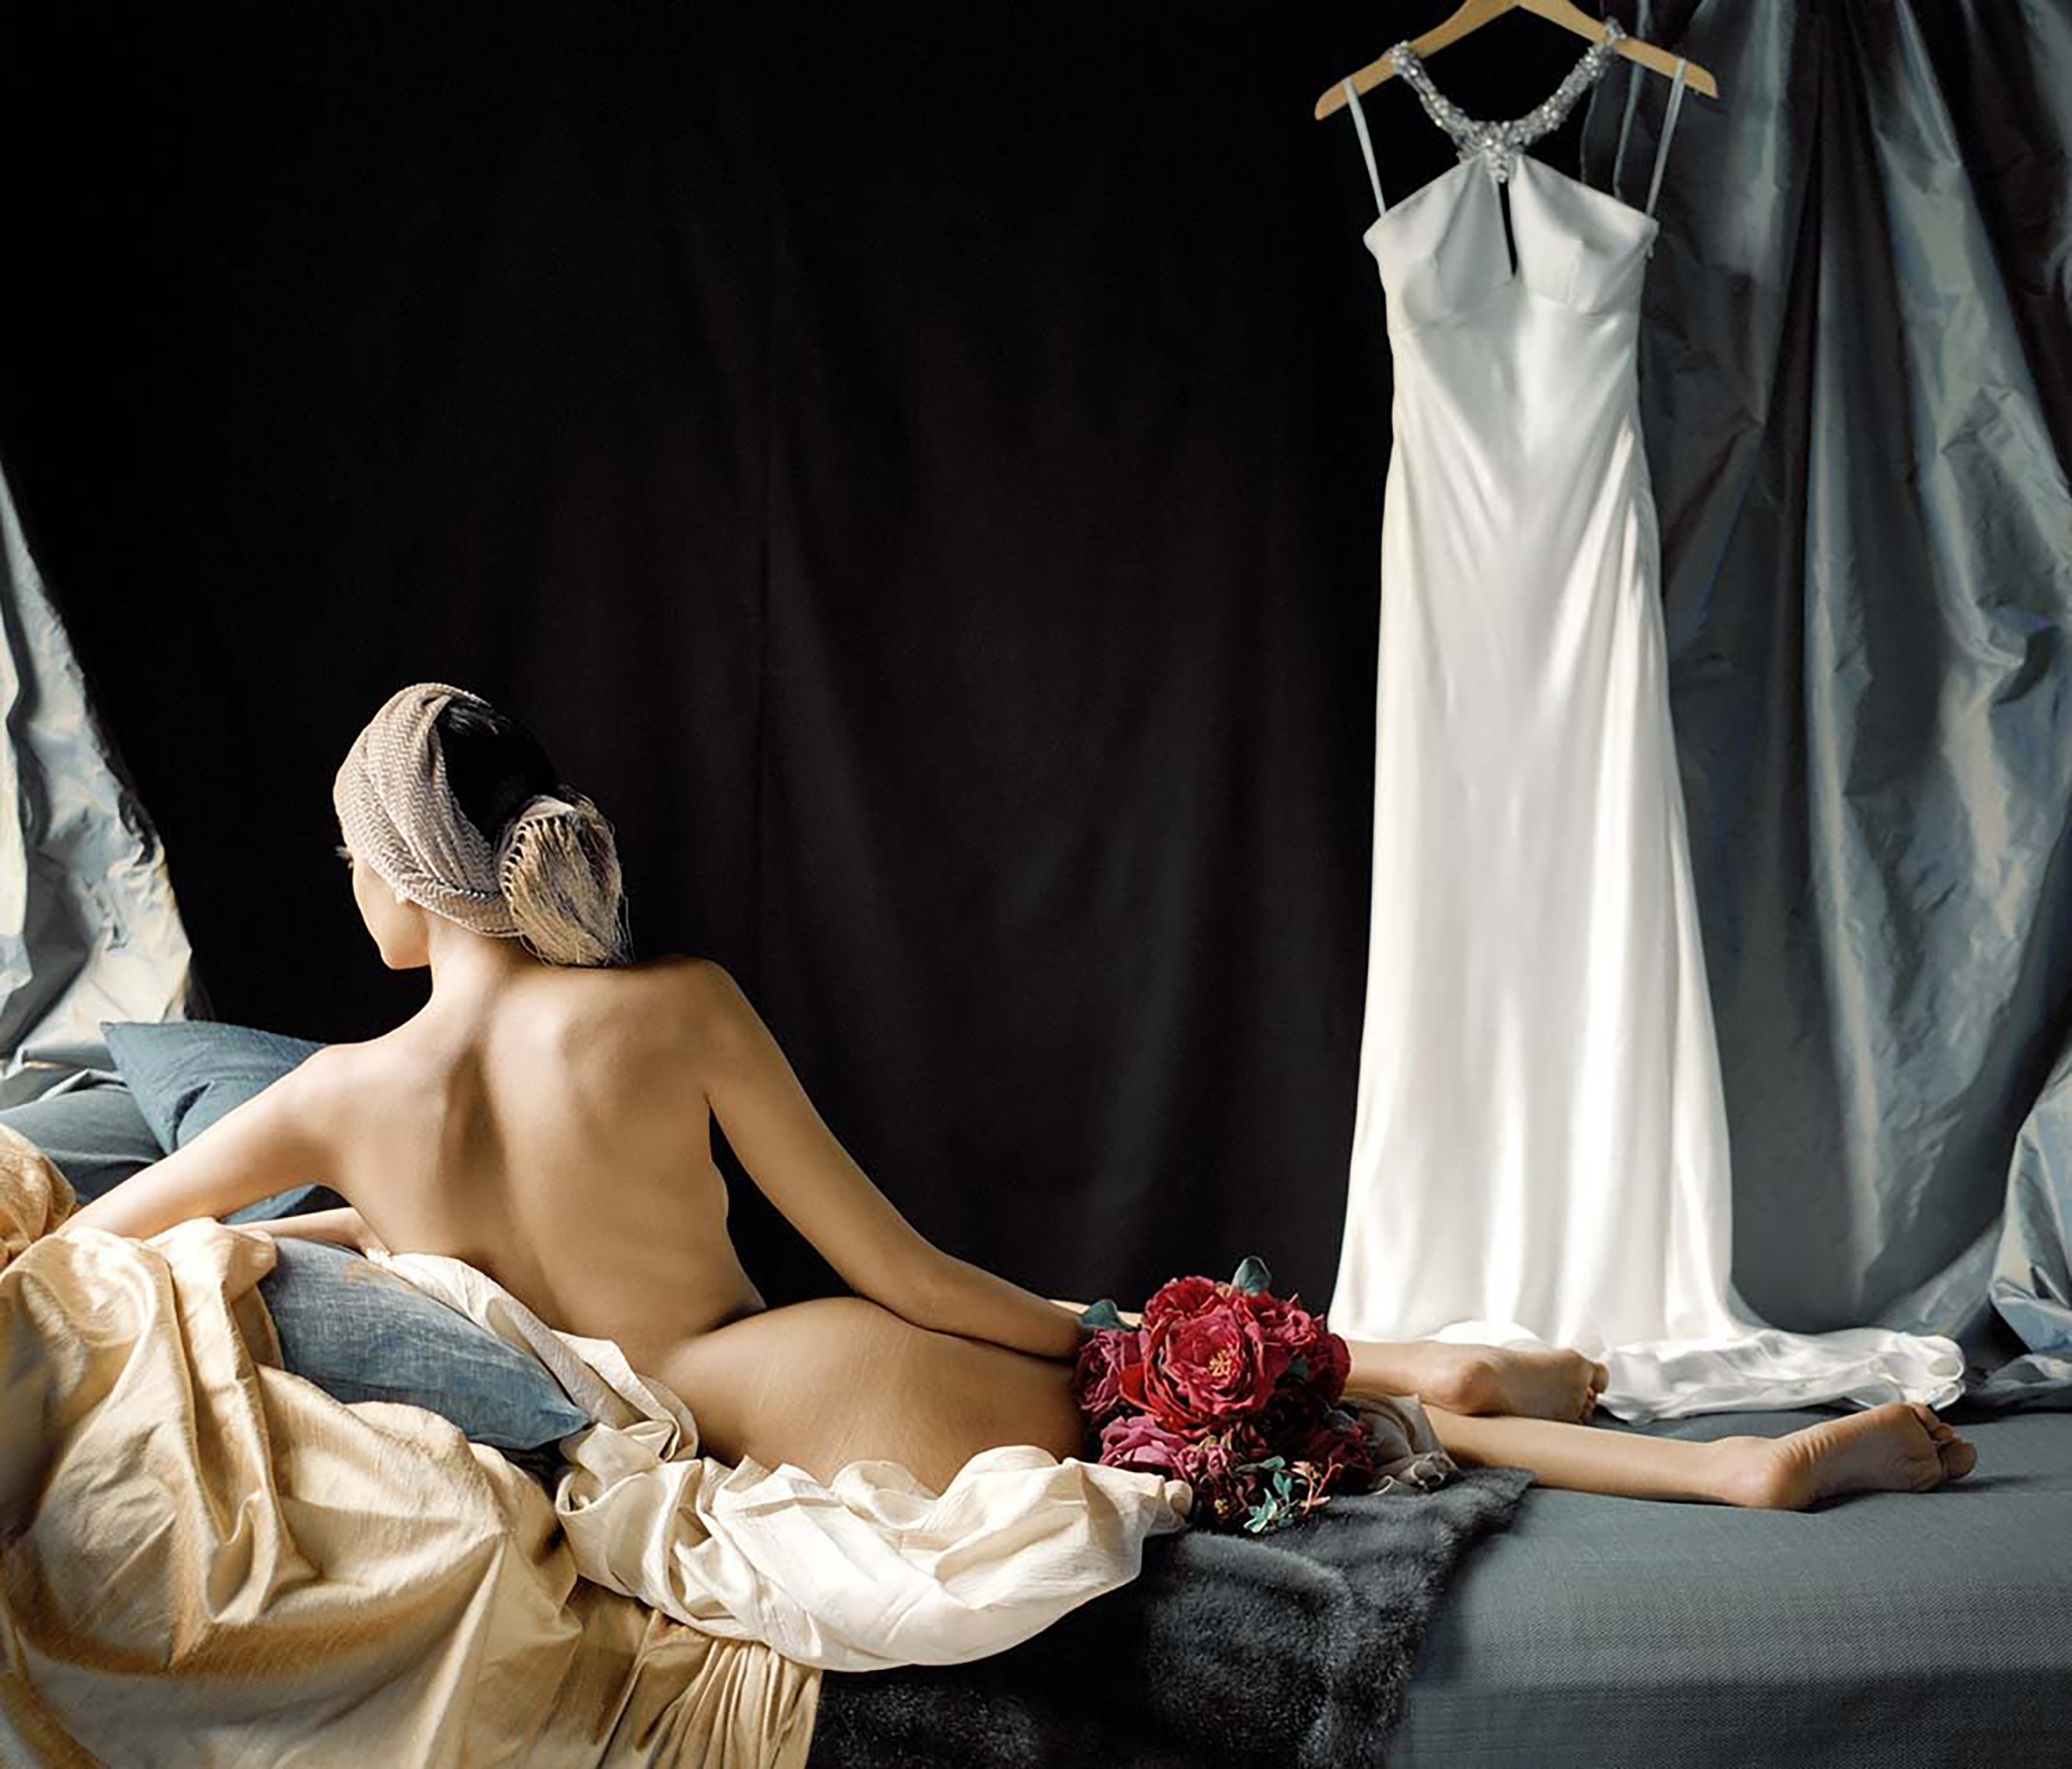 Rodney Smith - A woman lying on a bed with a white dress hanging beside her